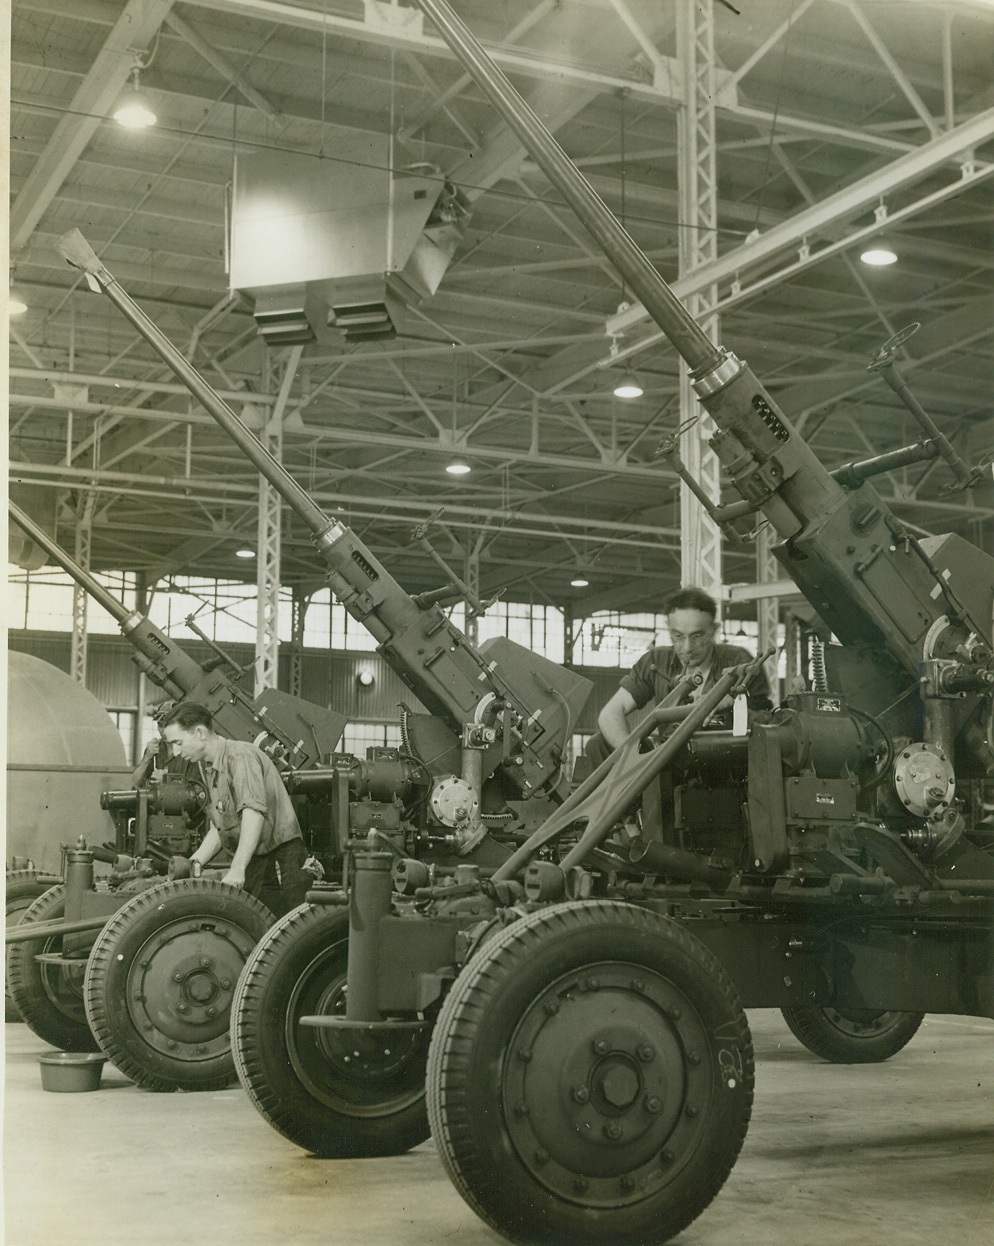 BOFORS ANTI-AIRCRAFT GUNS ROLL OFF PRODUCTION LINES, 8/28/1942. AKRON, OHIO—Skilled workmen turn out more than 30 huge Bofors Anti-aircraft guns at Firestone Tire and Rubber Co. plant here. Above photo shows part of the assembly line of these guns which were originally of Swedish design. They have an effective range of 6000 feet. Credit: OWI Radiophoto from ACME;